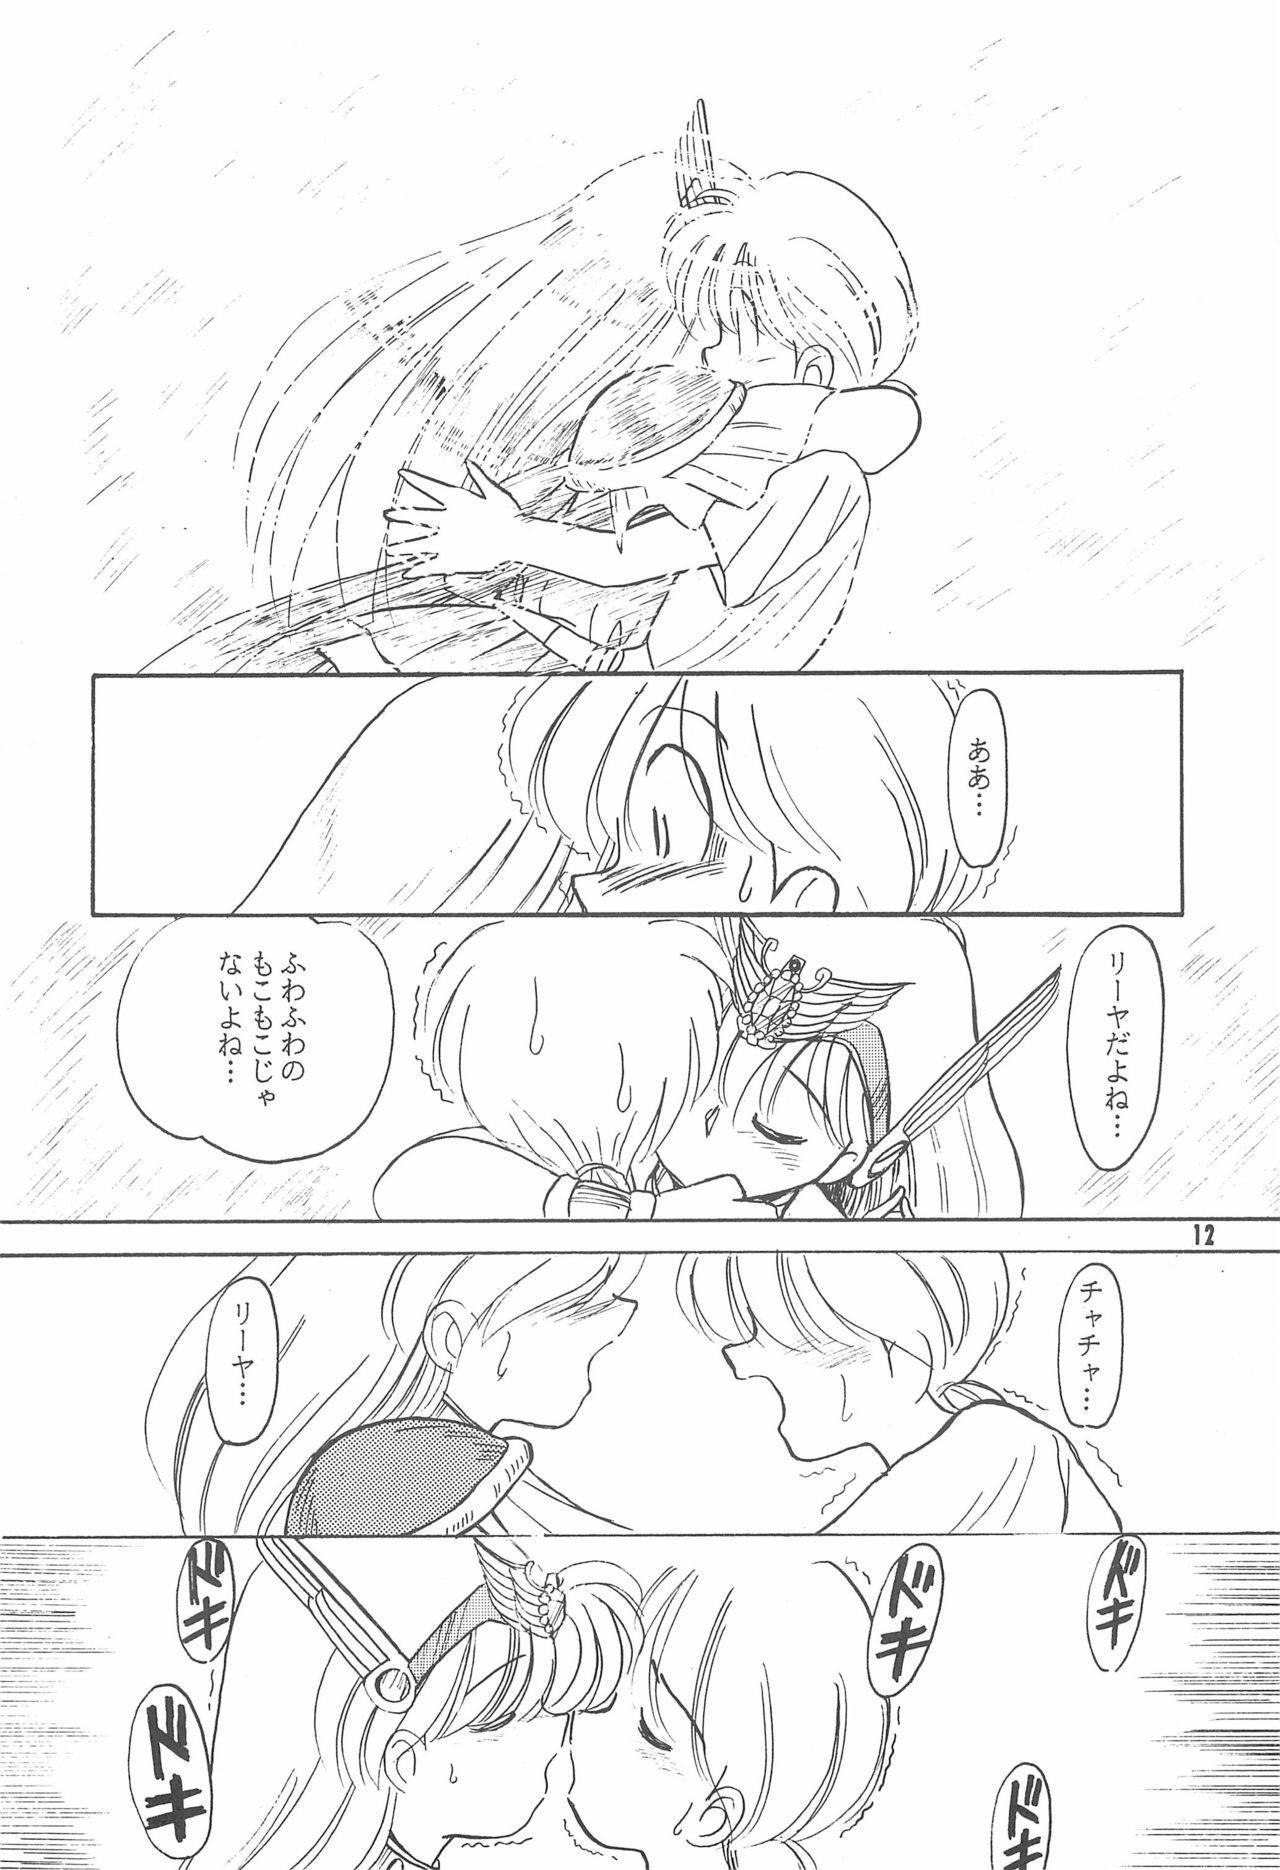 Little Red Riding Hood 11